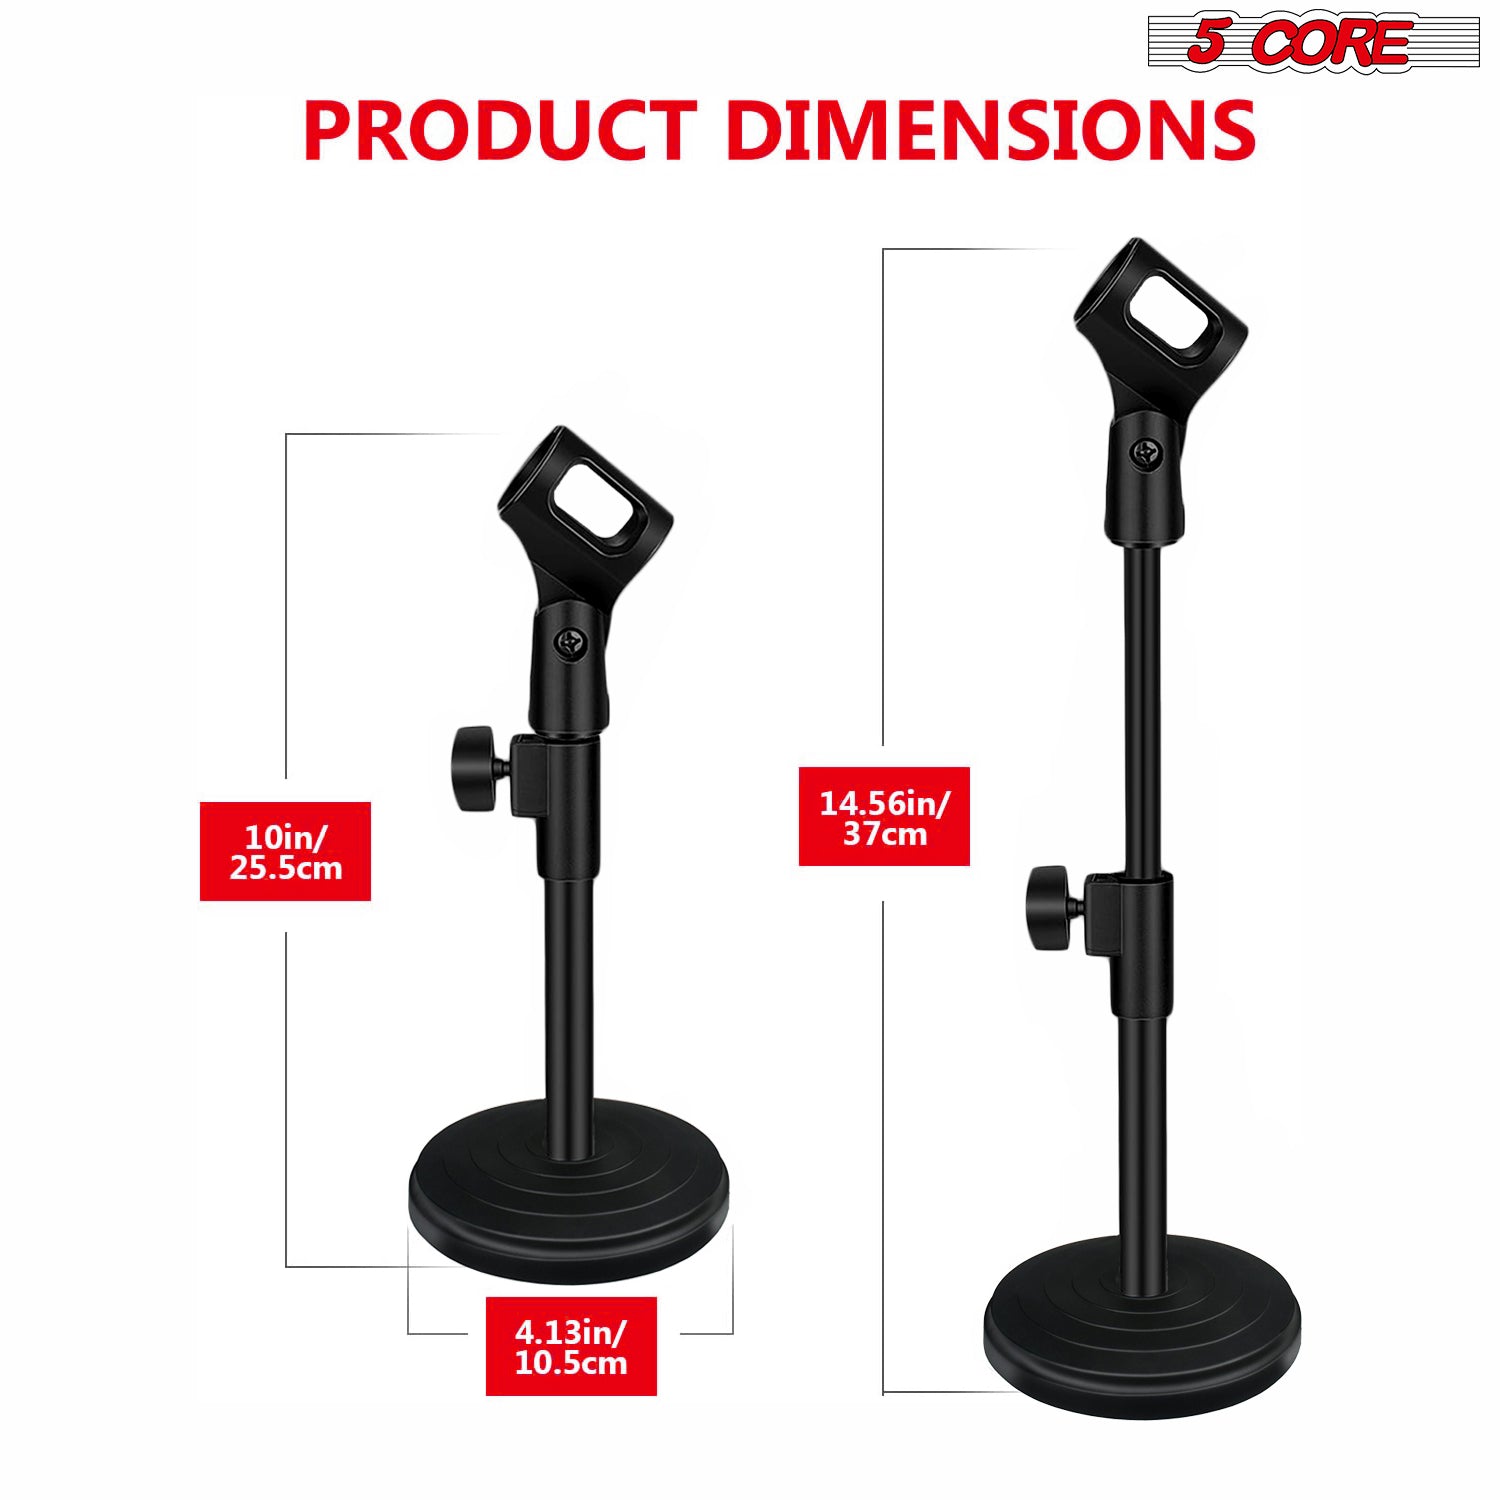 5 Core Universal Small Desktop Microphone Stand 1 Piece Black Height Adjustable Tabletop Mic Stand For Dynamic Wired Microphone Like Samson Q2U Shure SM58 SM57 PGA48 PGA58 - MS RBS BOOM